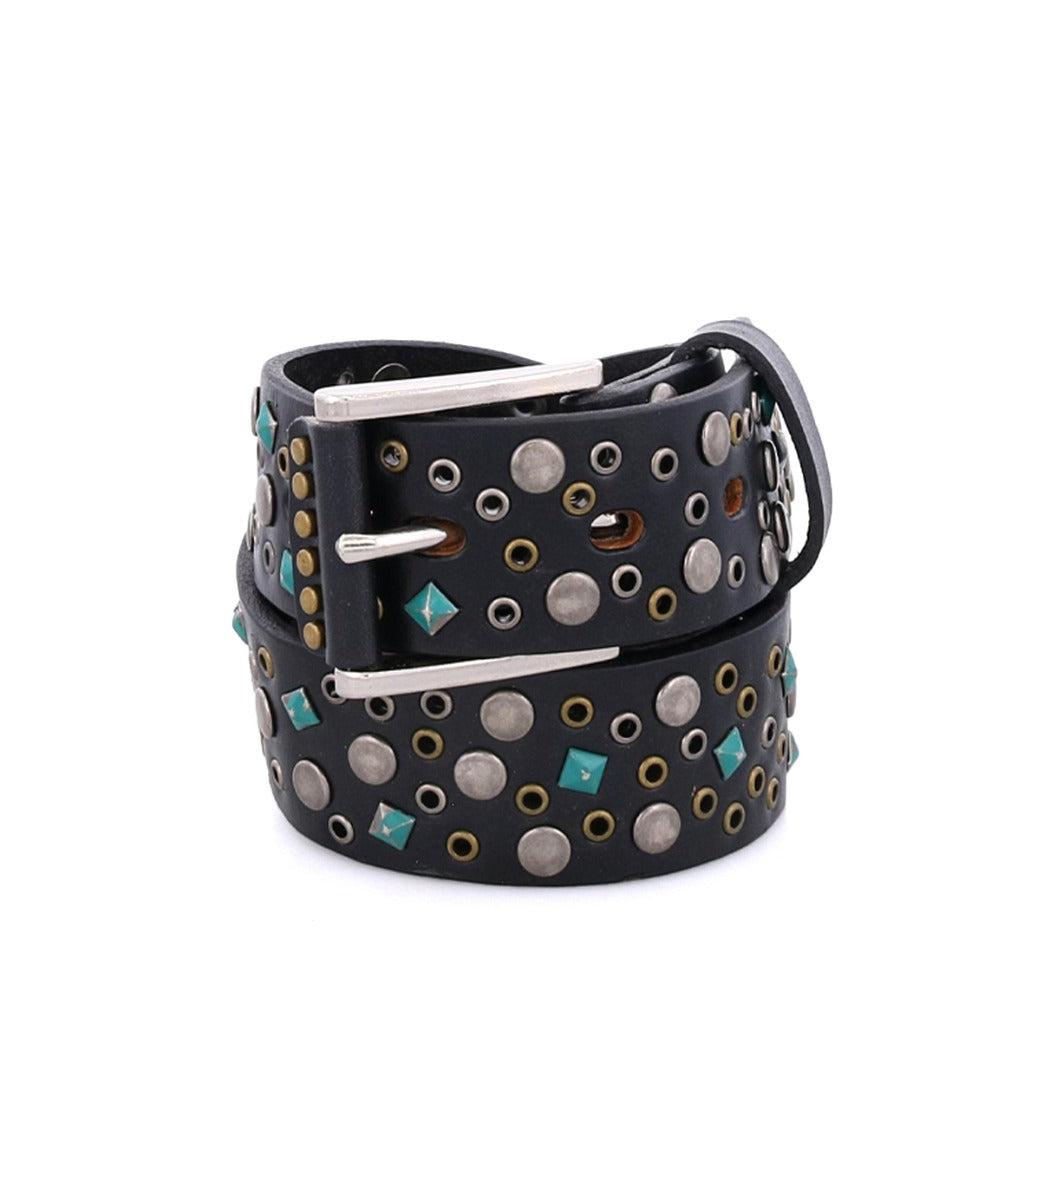 A Tammin belt with turquoise and silver studs. (Brand Name: Bed Stu)